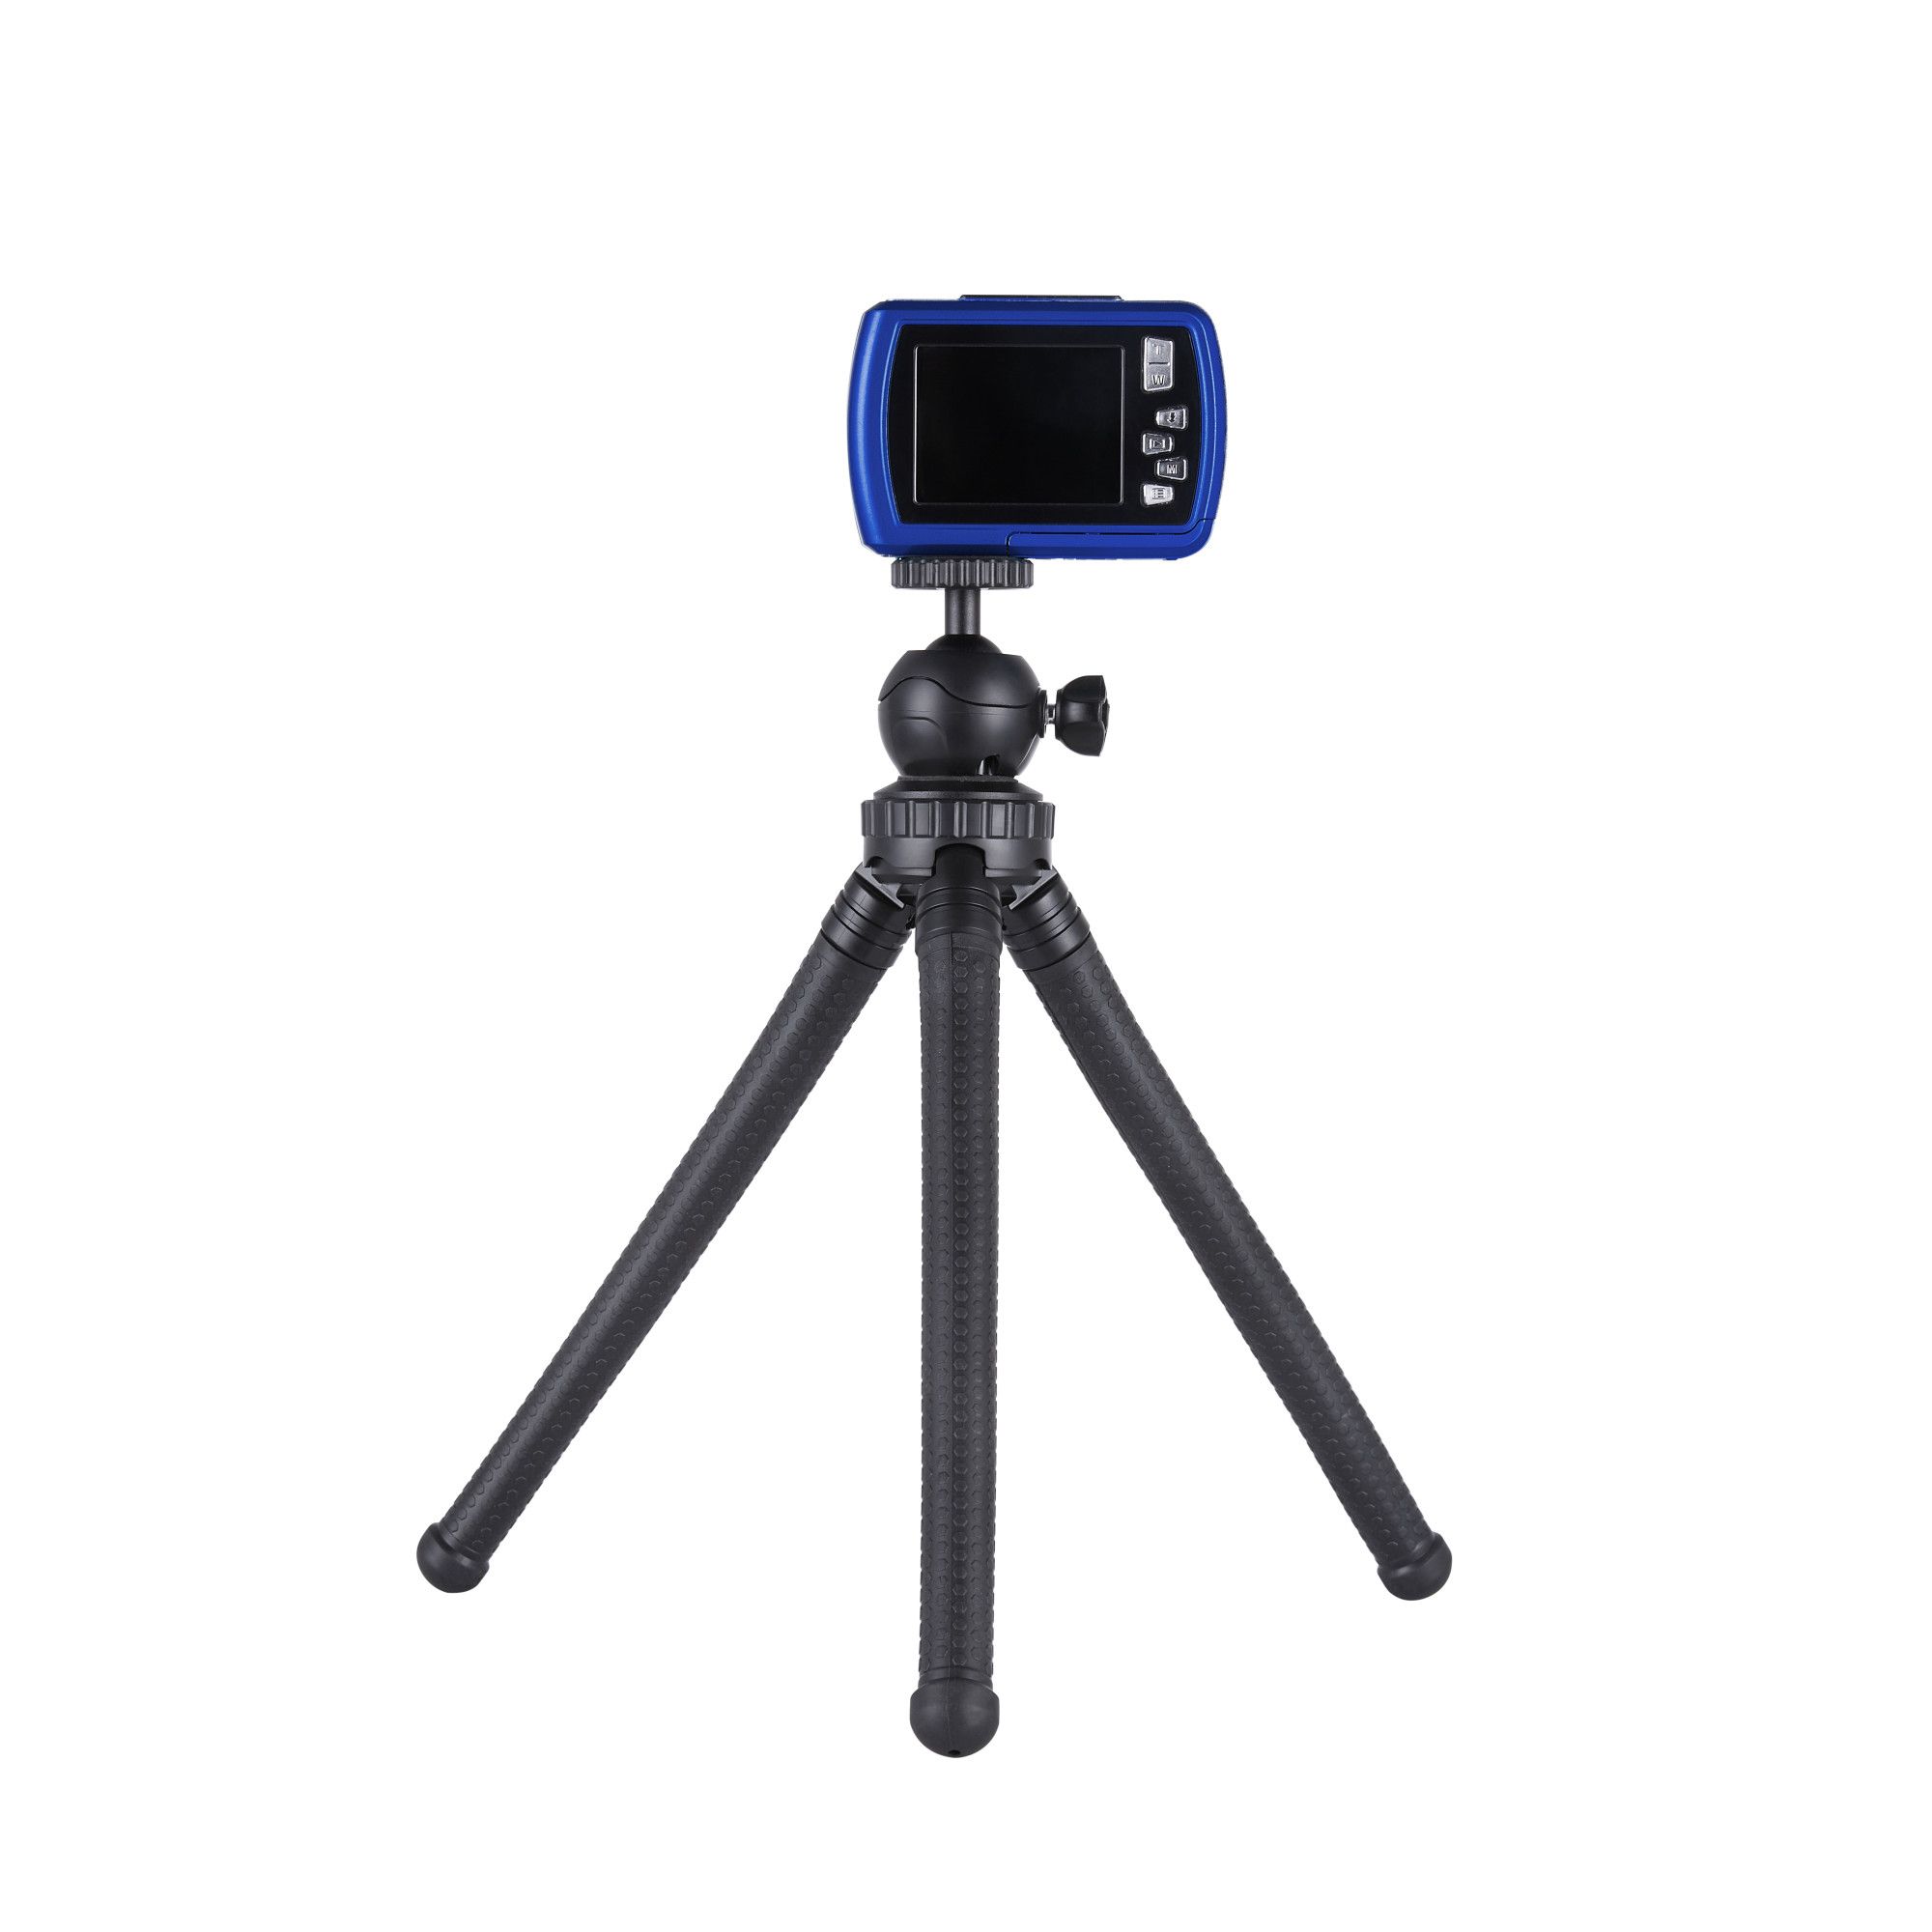 Onn. Adjustable Mini Tripod Stand for Cameras/GoPros/Smartphone Devices | Walmart (US)